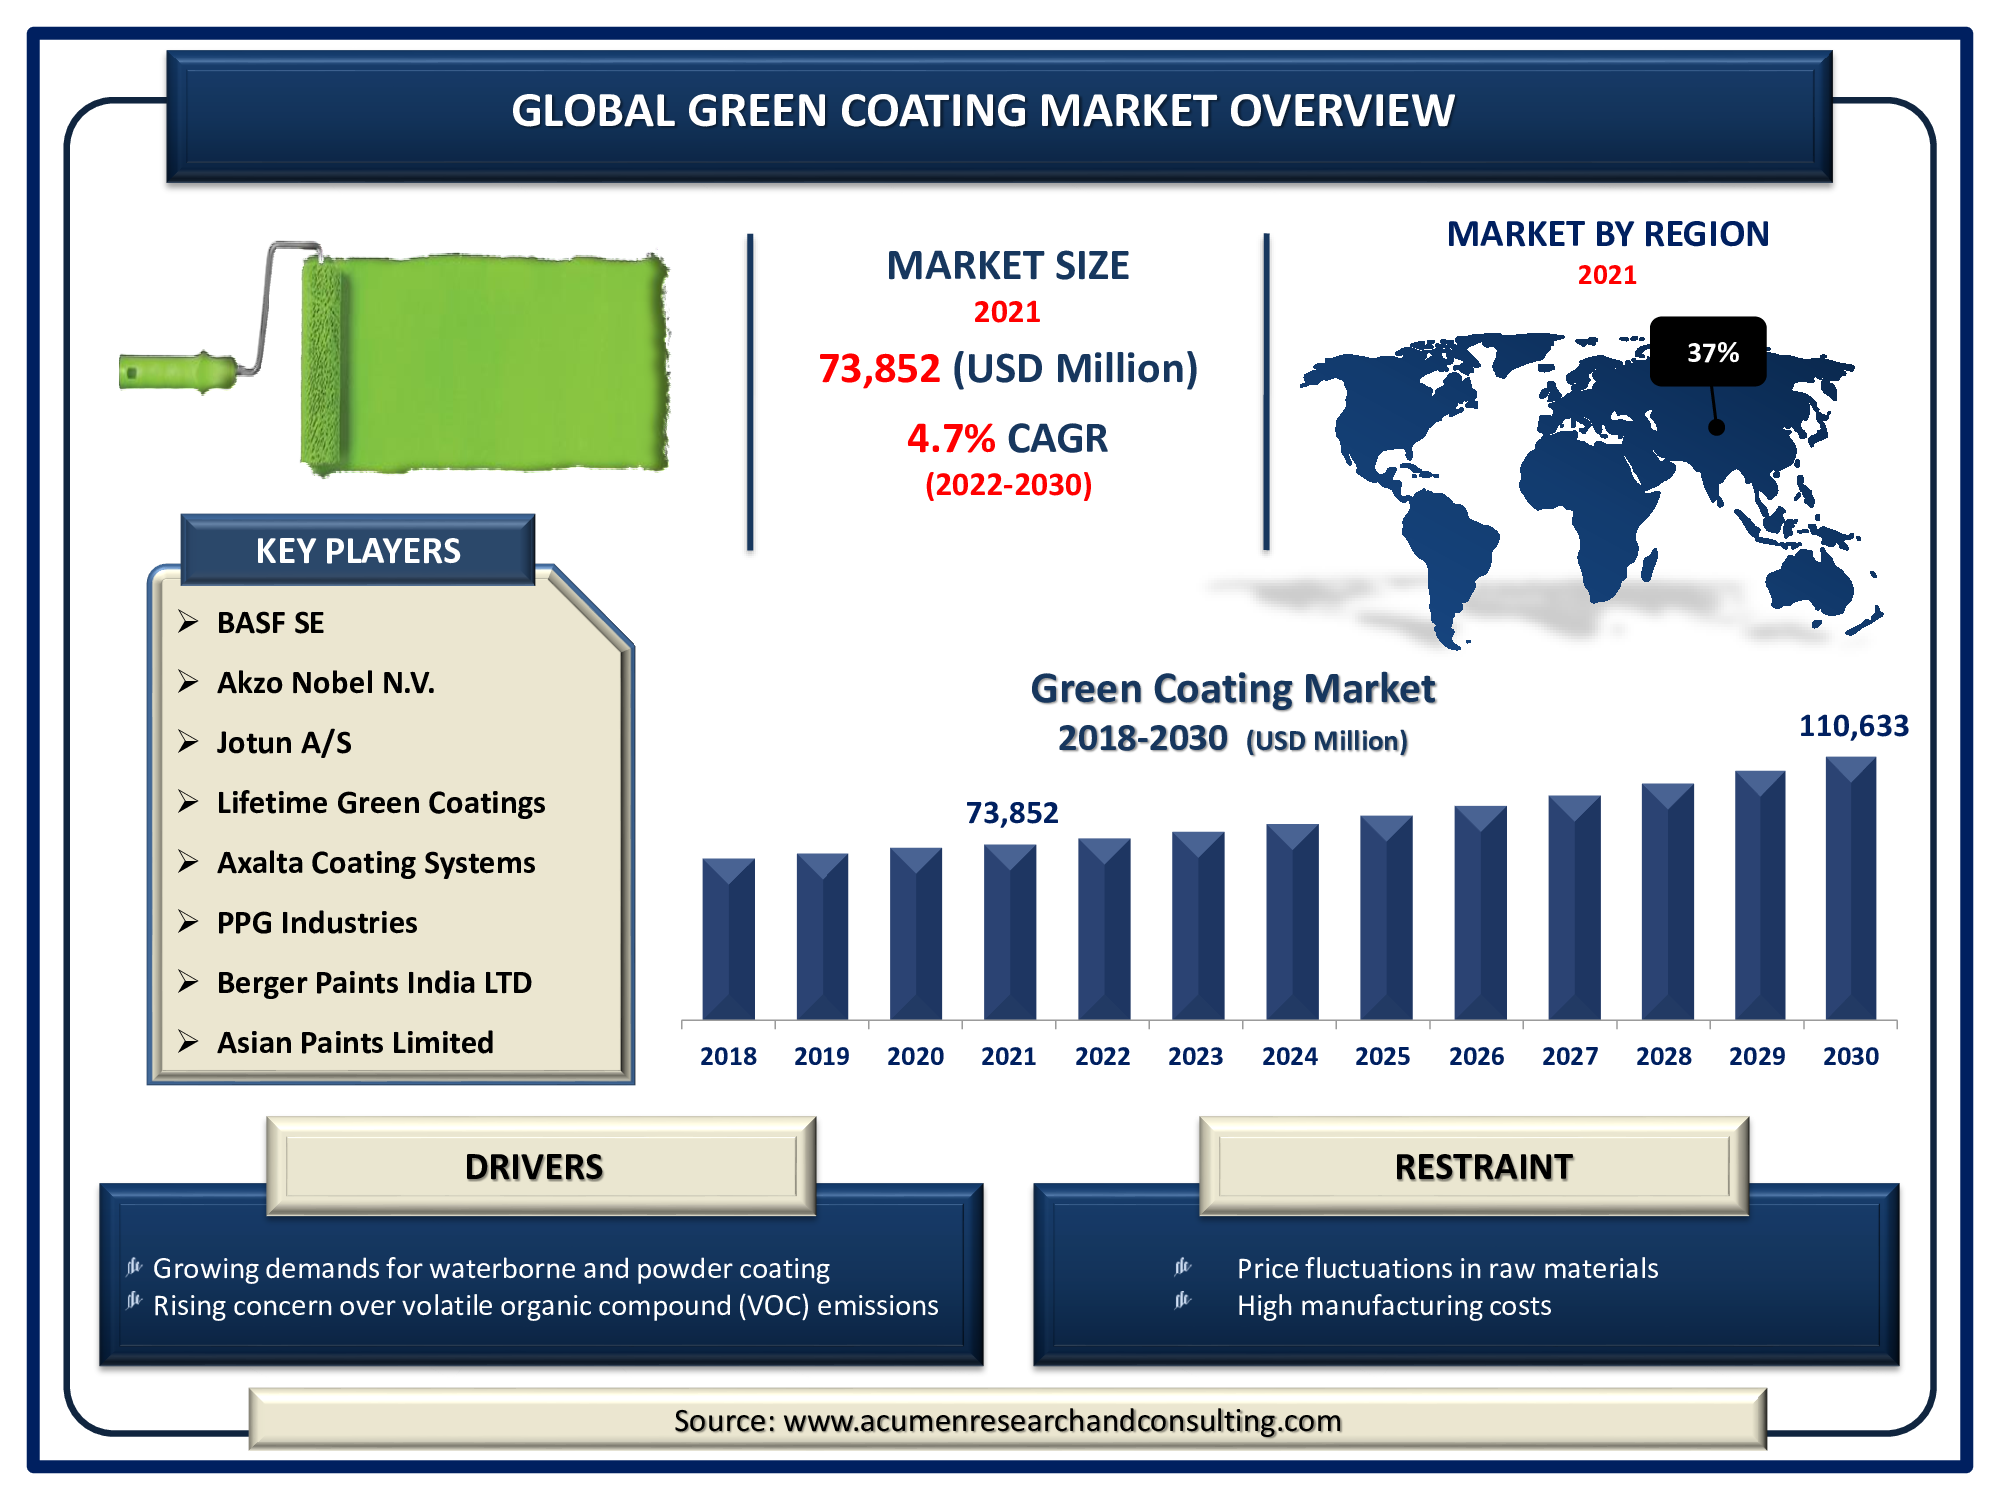 Green Coating Market Size accounted for USD 73,852 Million in 2021 and is expected to reach the market value of USD 110,633 Million by 2030 at a CAGR of 4.7% during the forecast period from 2022 to 2030.